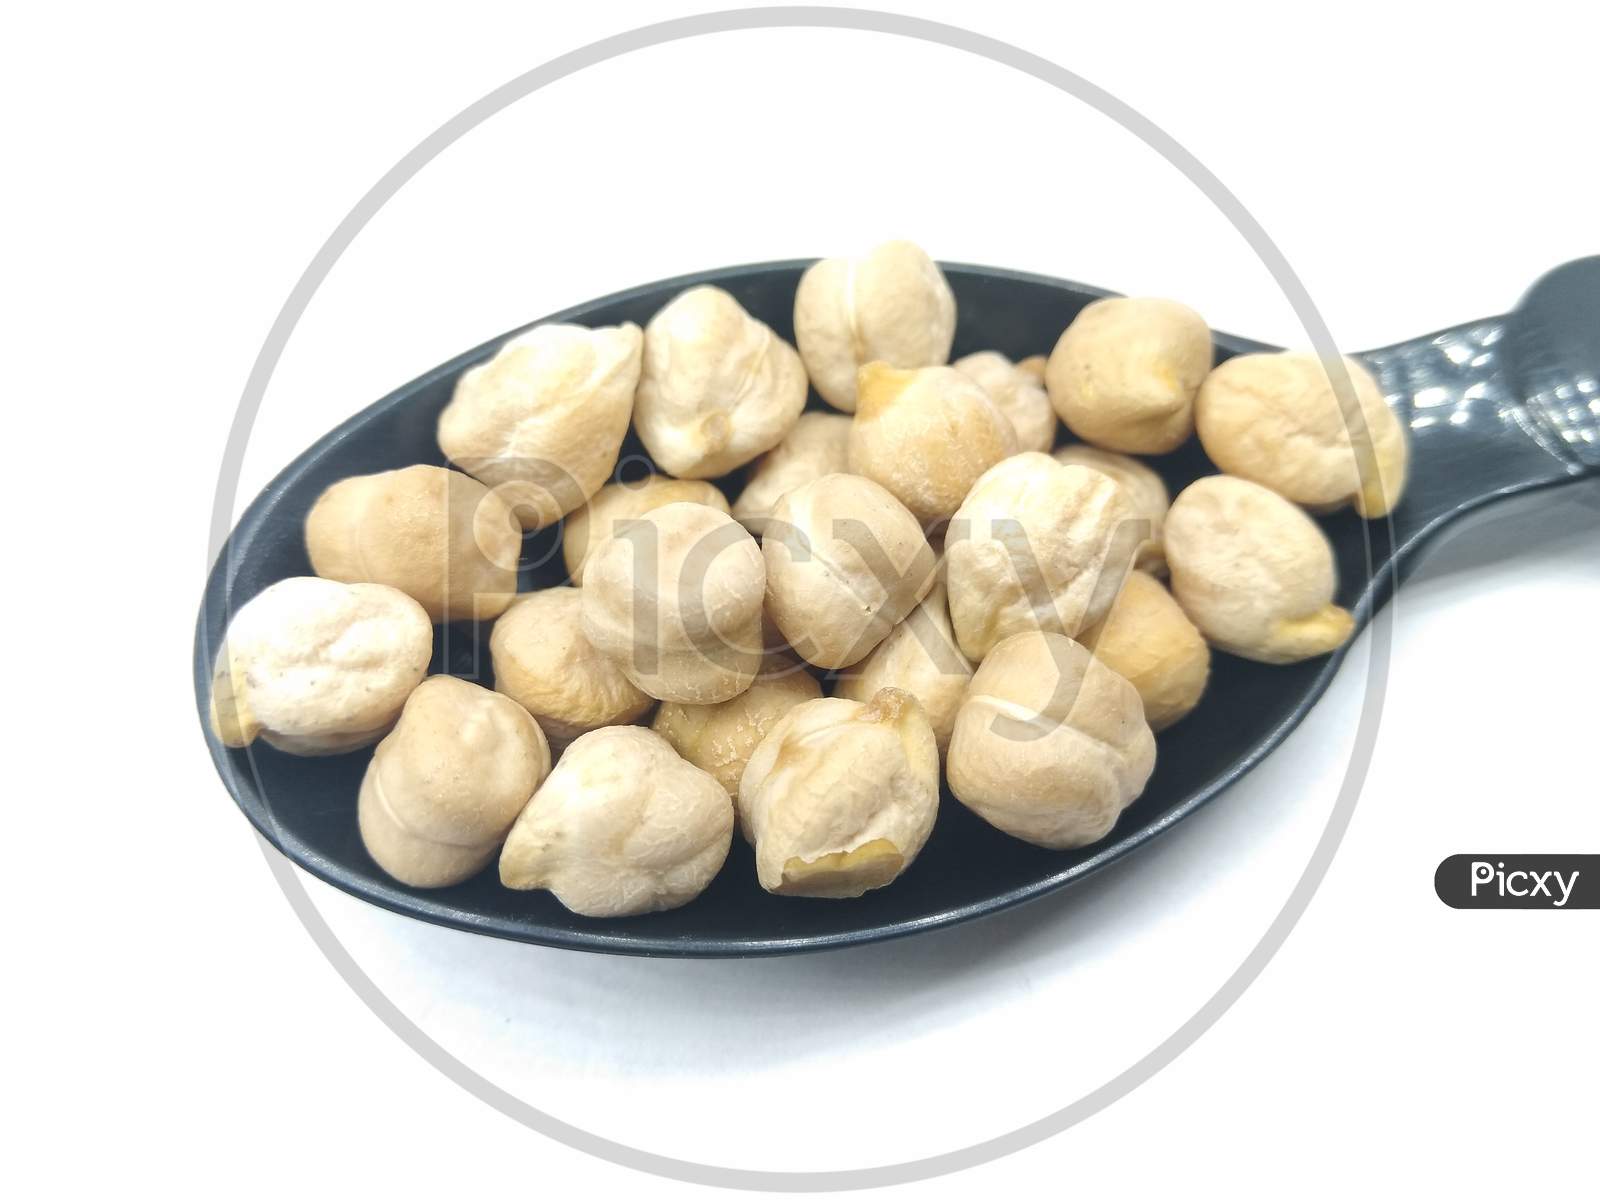 Pigeon Pea or Channa or Kabuli Channa Over an Isolated White Background